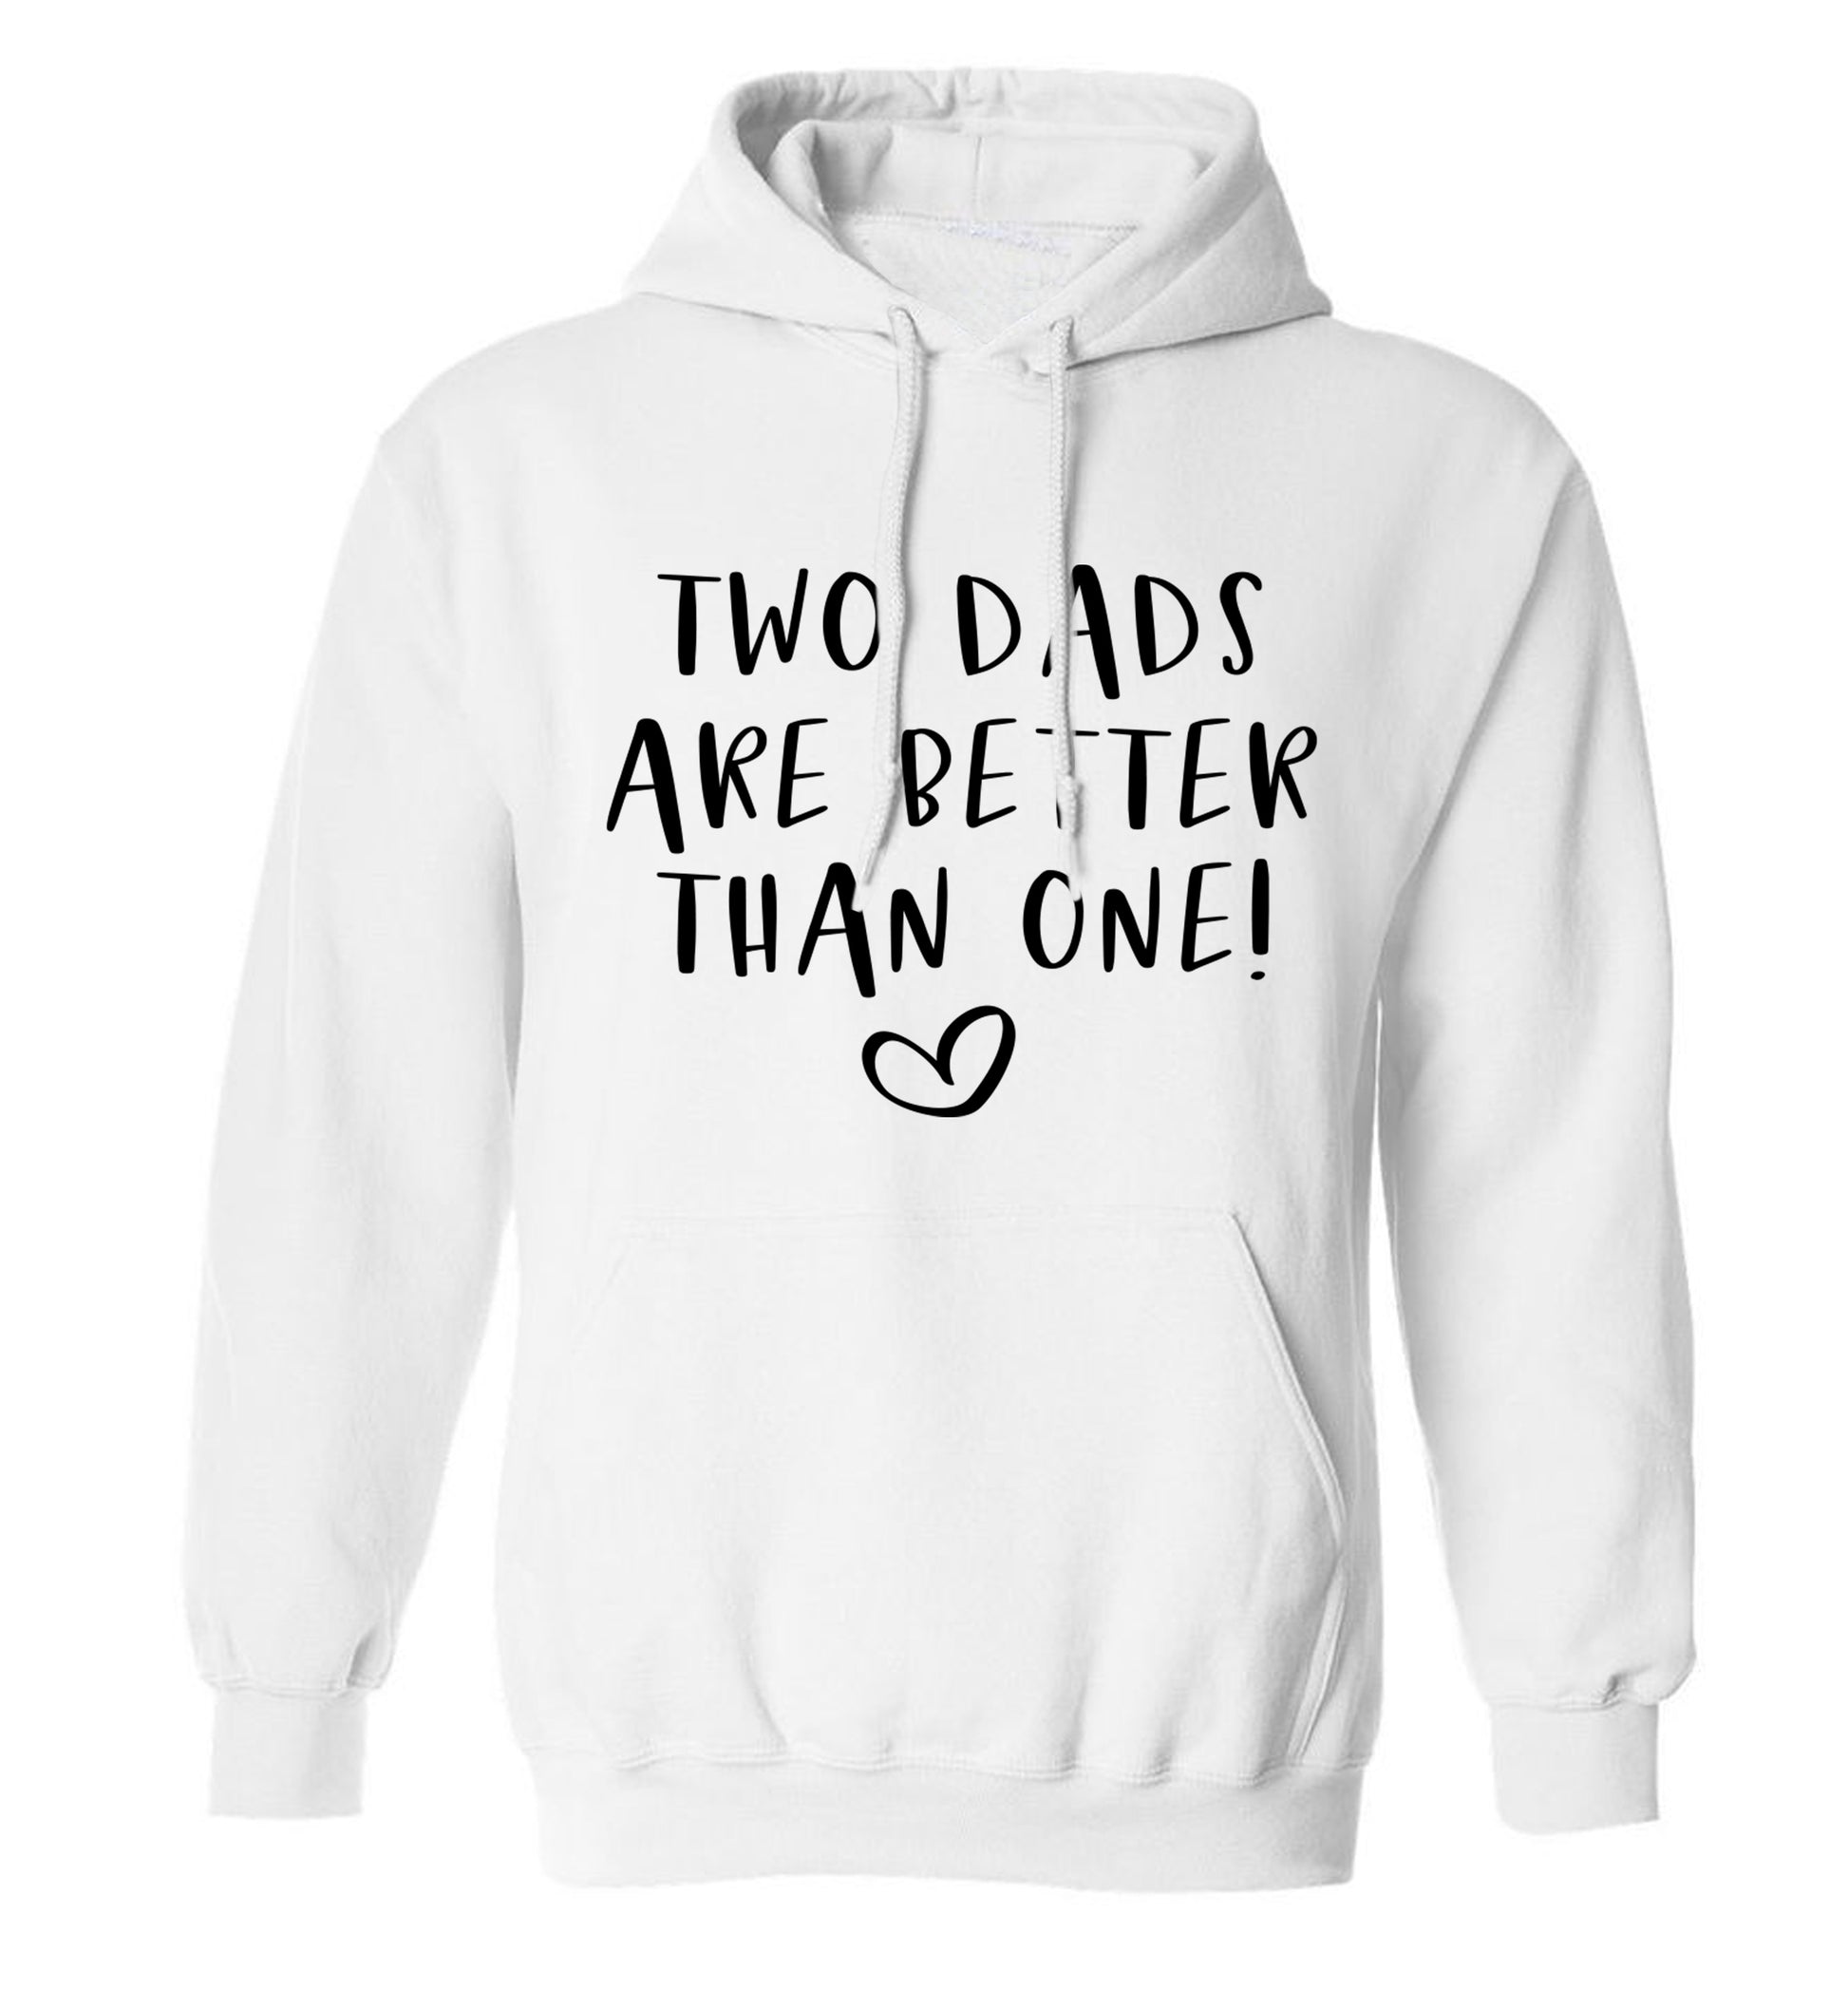 Two dads are better than one adults unisex white hoodie 2XL